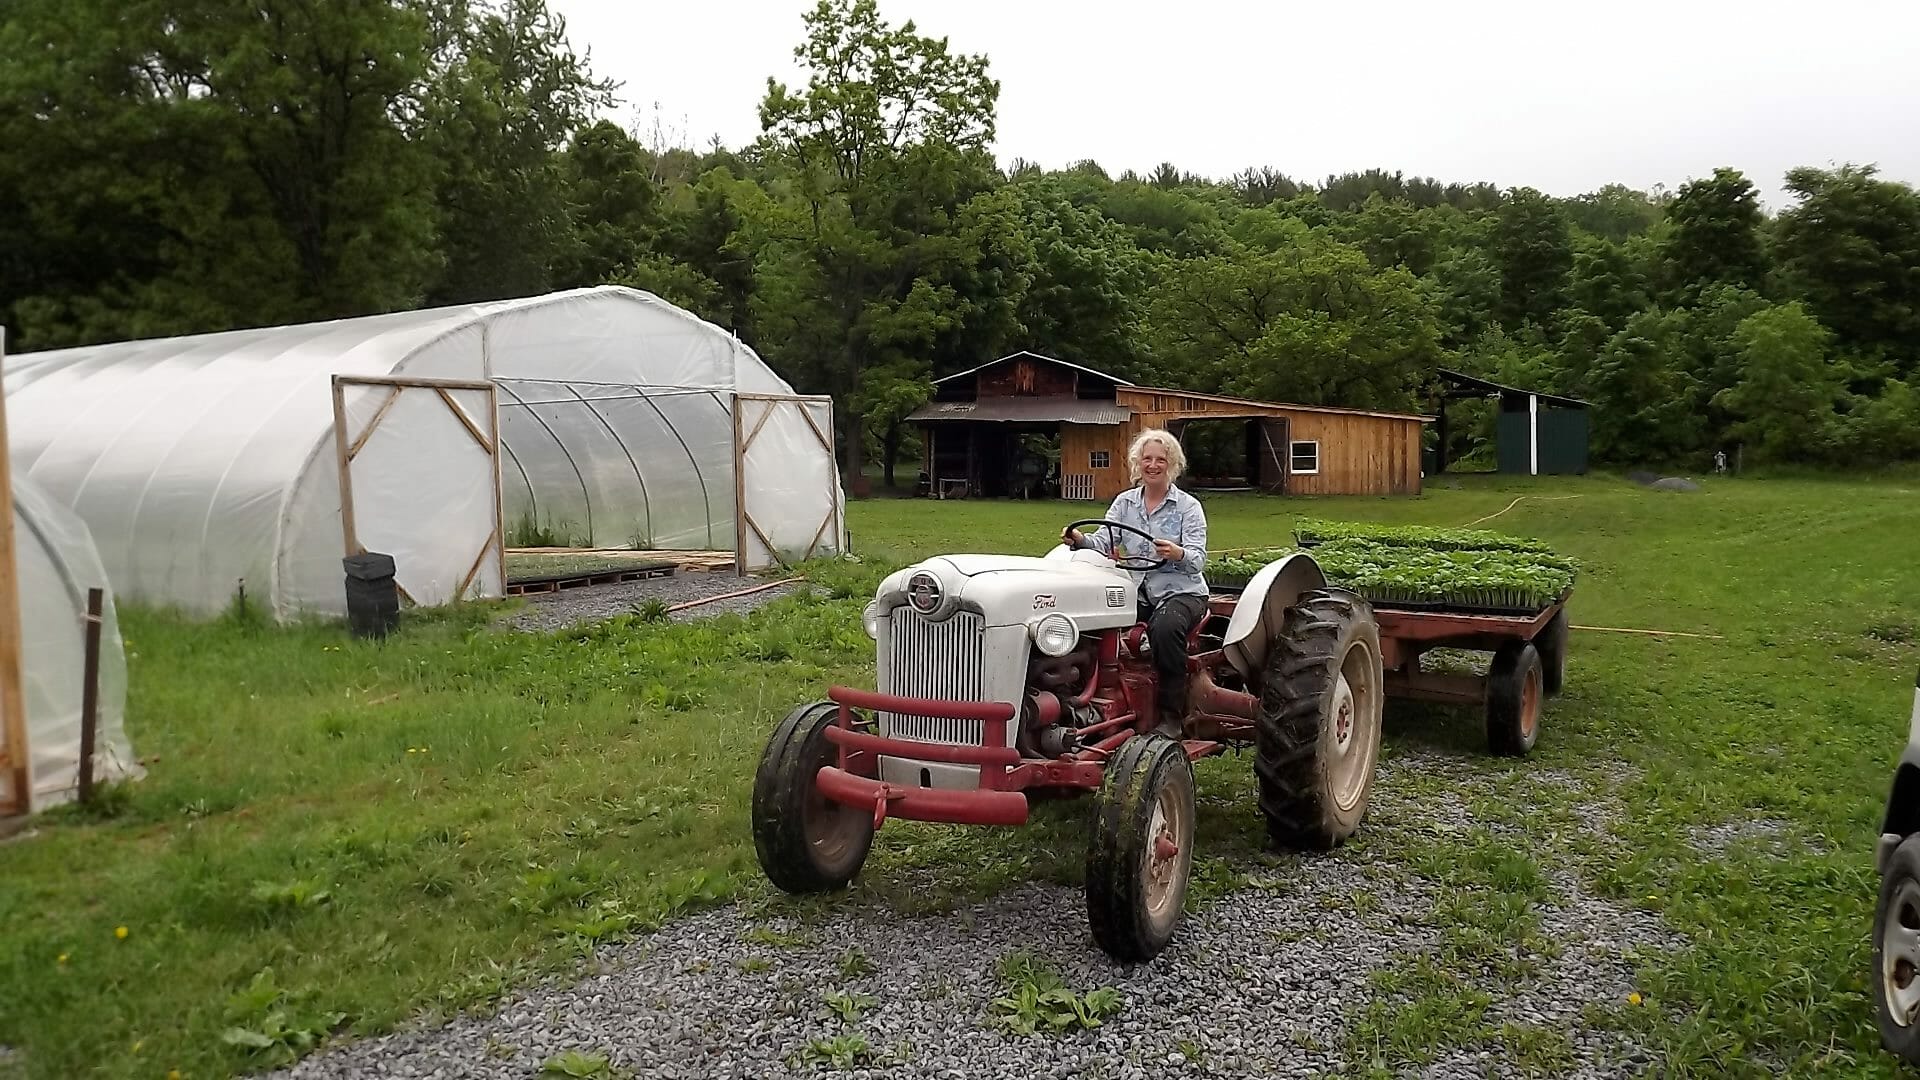 Deb Kavakos, of Stoneledge Farm in New York, was an early adopter of the CSA model in the U.S. / Courtesy Stoneledge Farm